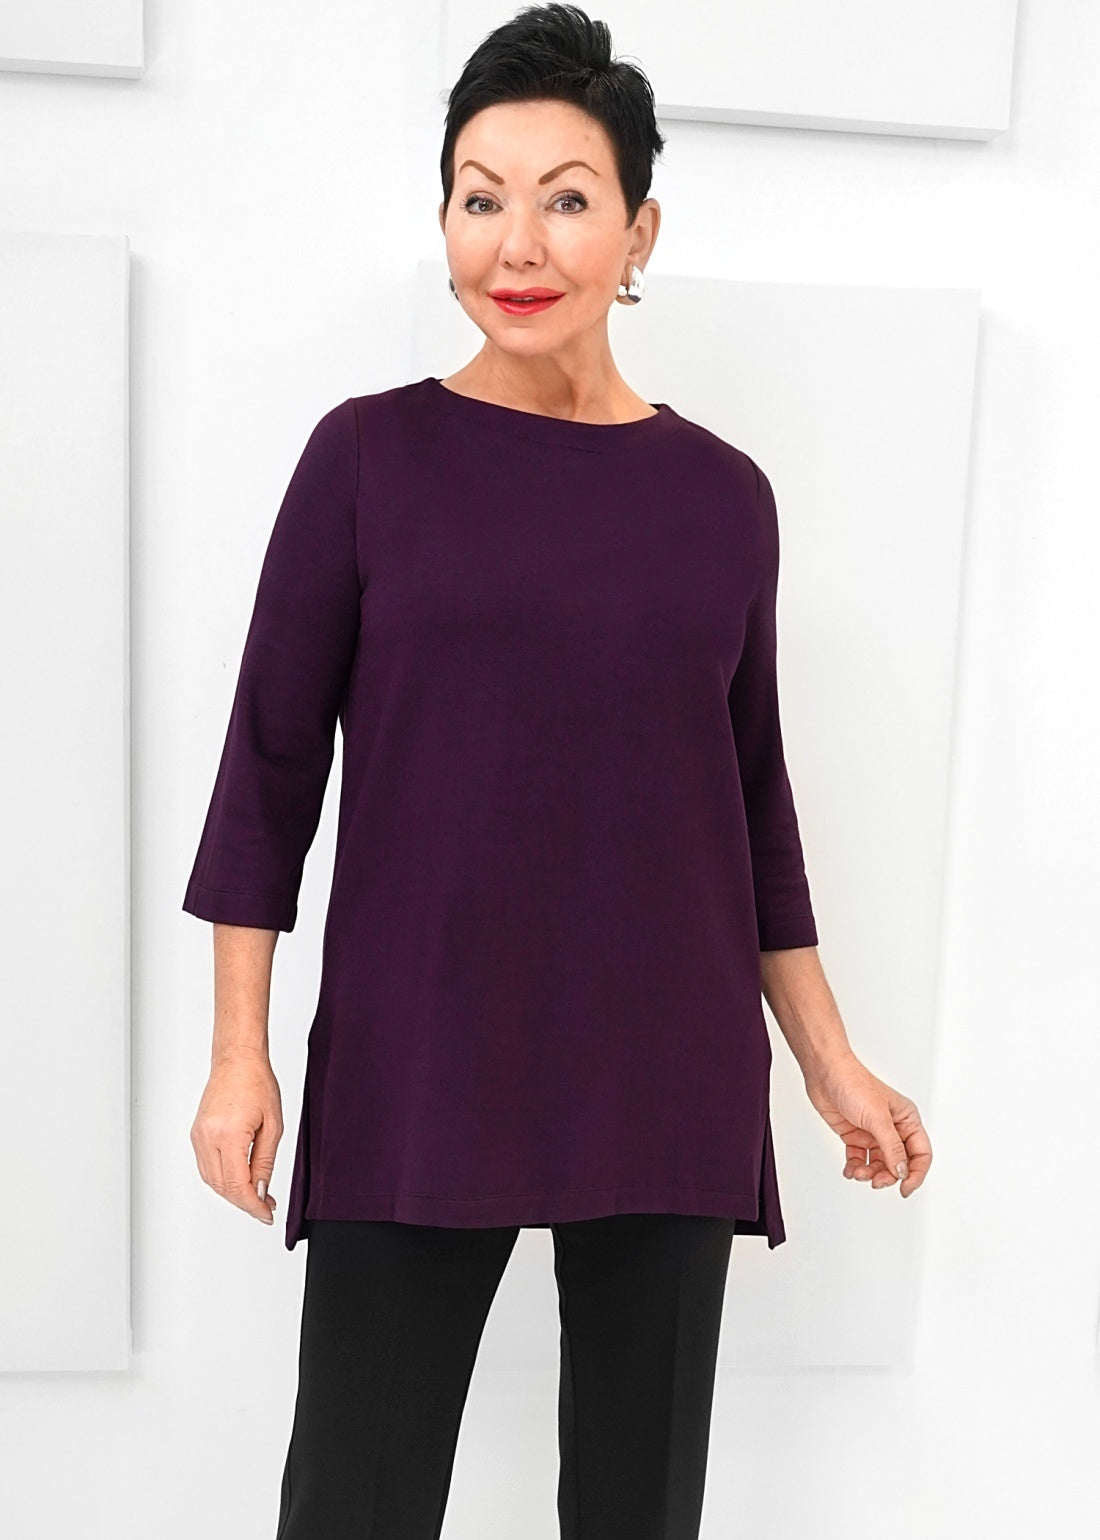 Capote - Lily Boatneck 3/4 Sleeve Tunic